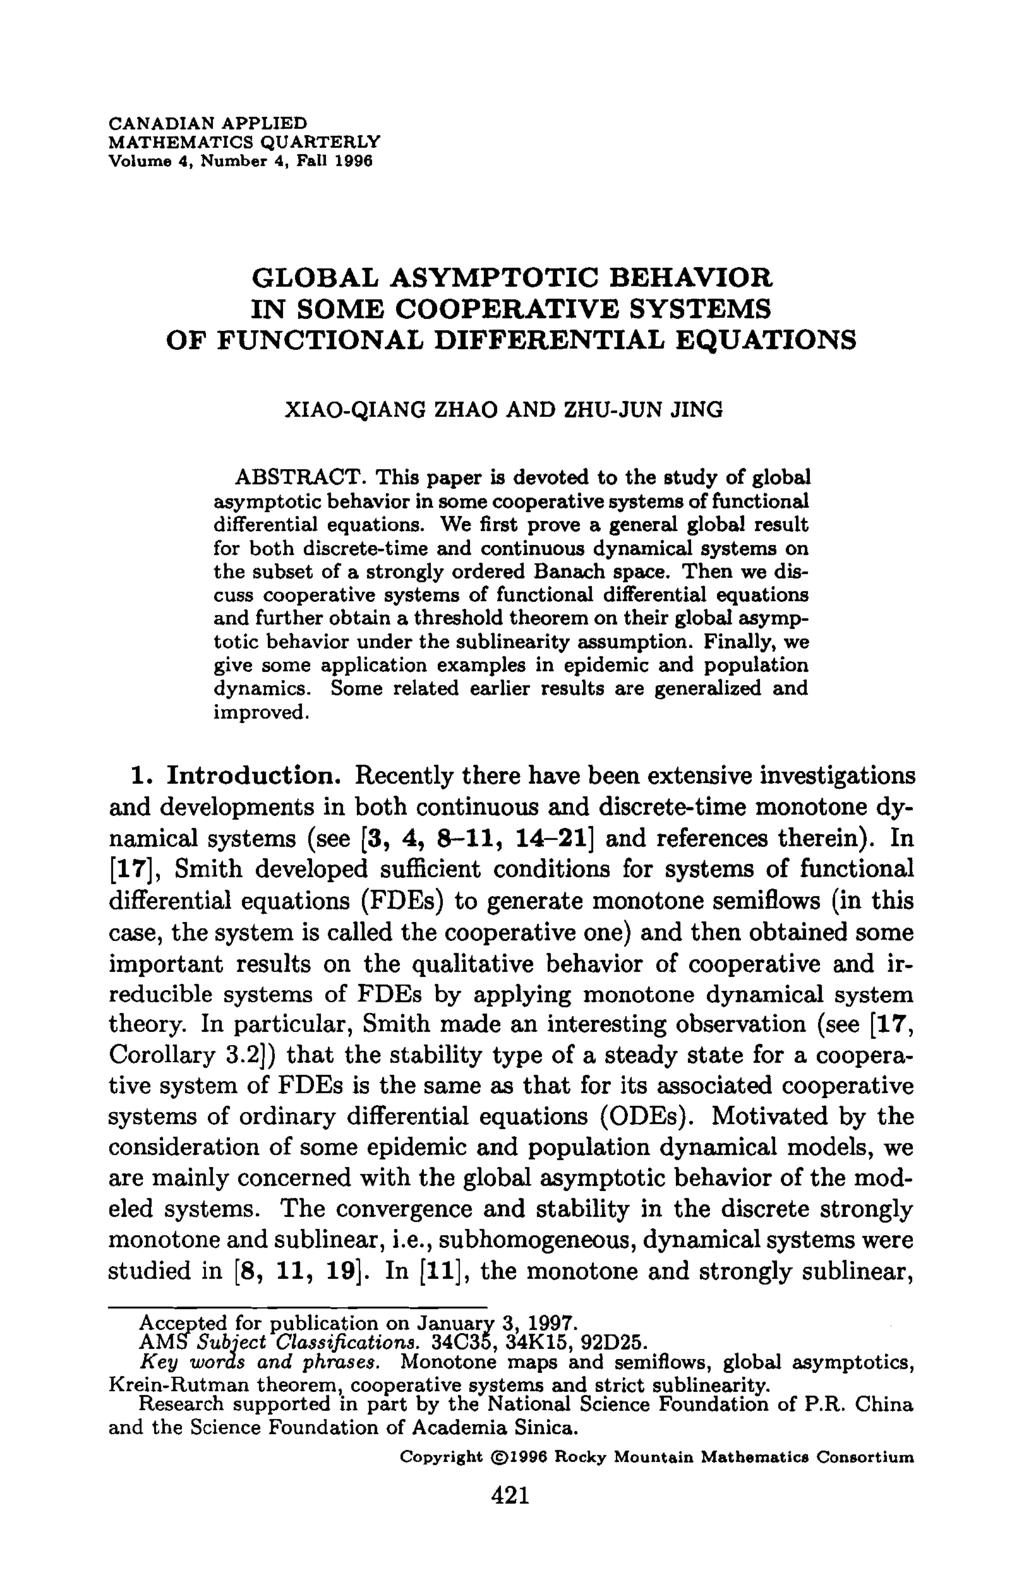 CANADIAN APPLIED MATHEMATICS QUARTERLY Volume 4, Number 4, Fall 1996 GLOBAL ASYMPTOTIC BEHAVIOR IN SOME COOPERATIVE SYSTEMS OF FUNCTIONAL DIFFERENTIAL EQUATIONS XIAO-QIANG ZHAO AND ZHU-JUN JING